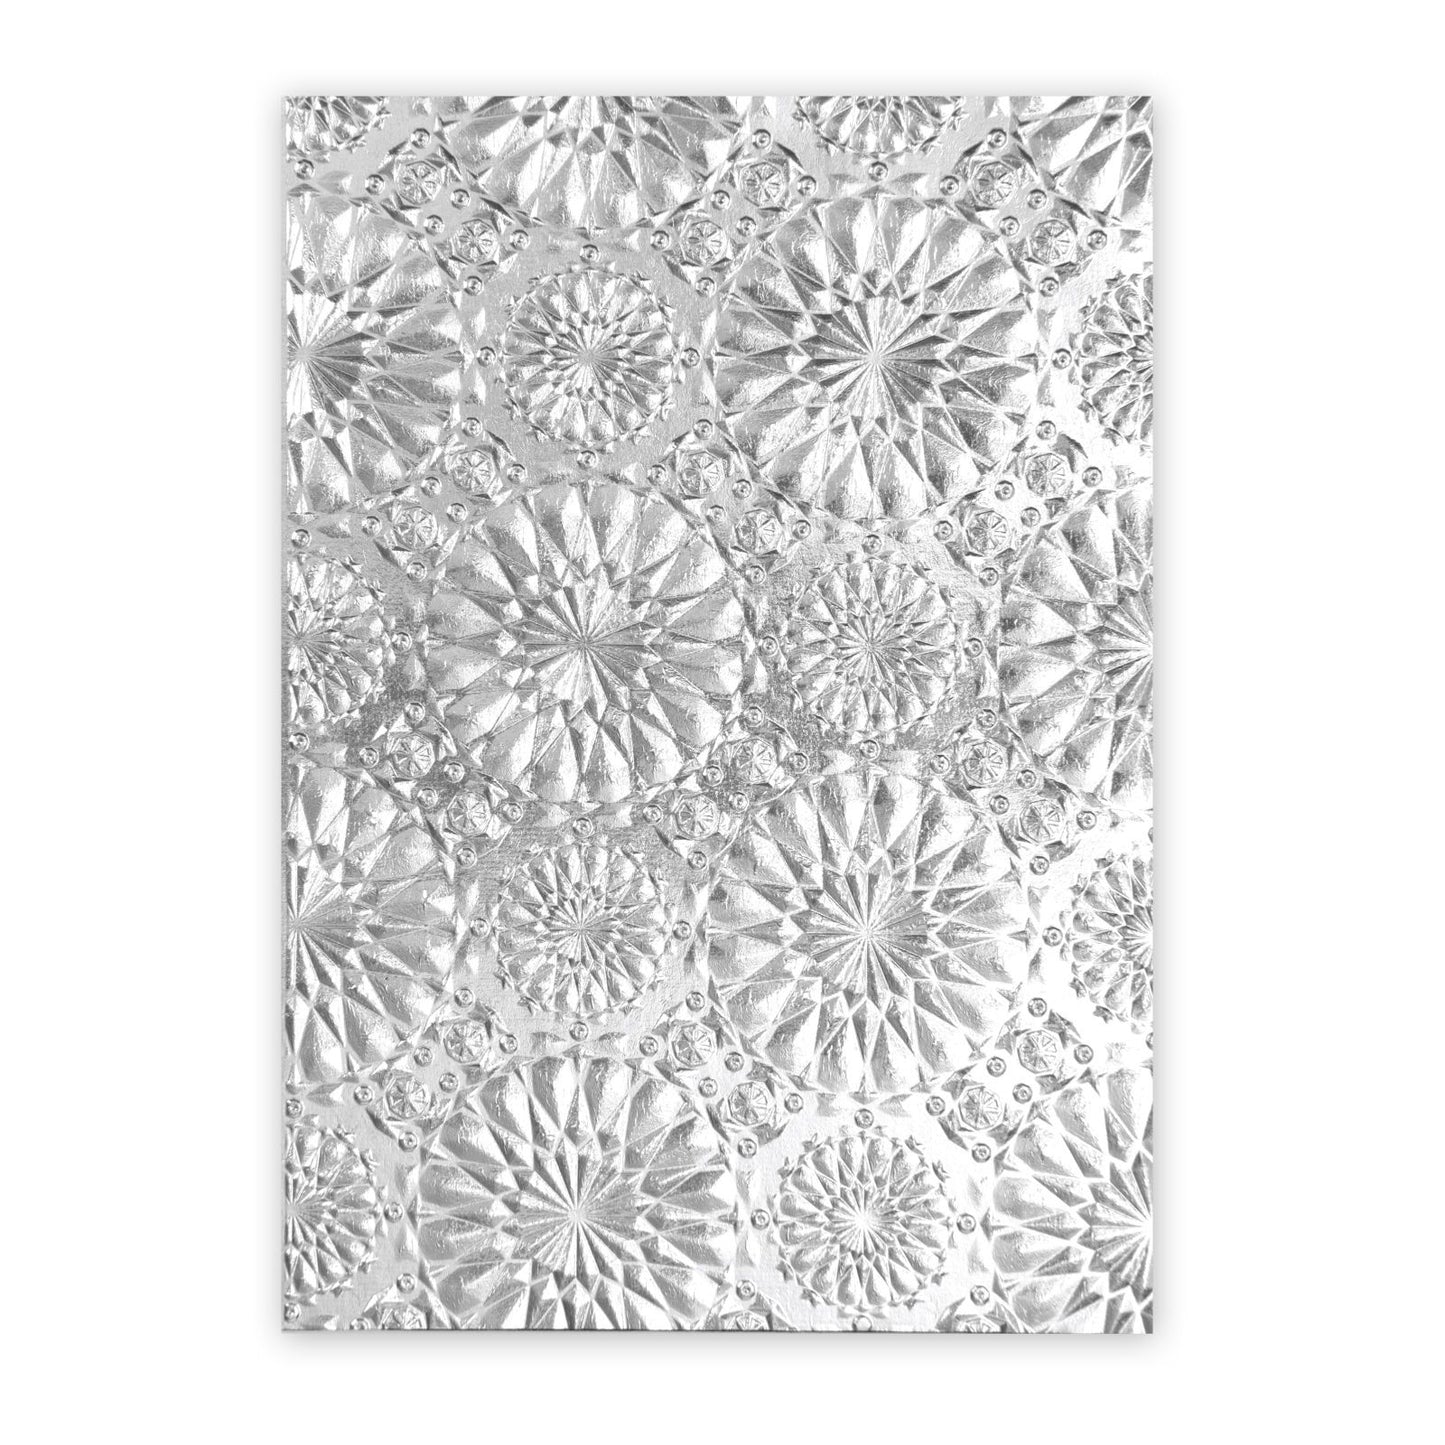 Sizzix Tim Holtz Kaleidoscope 3D Texture Fades Embossing Folder - Alterations Collection A6